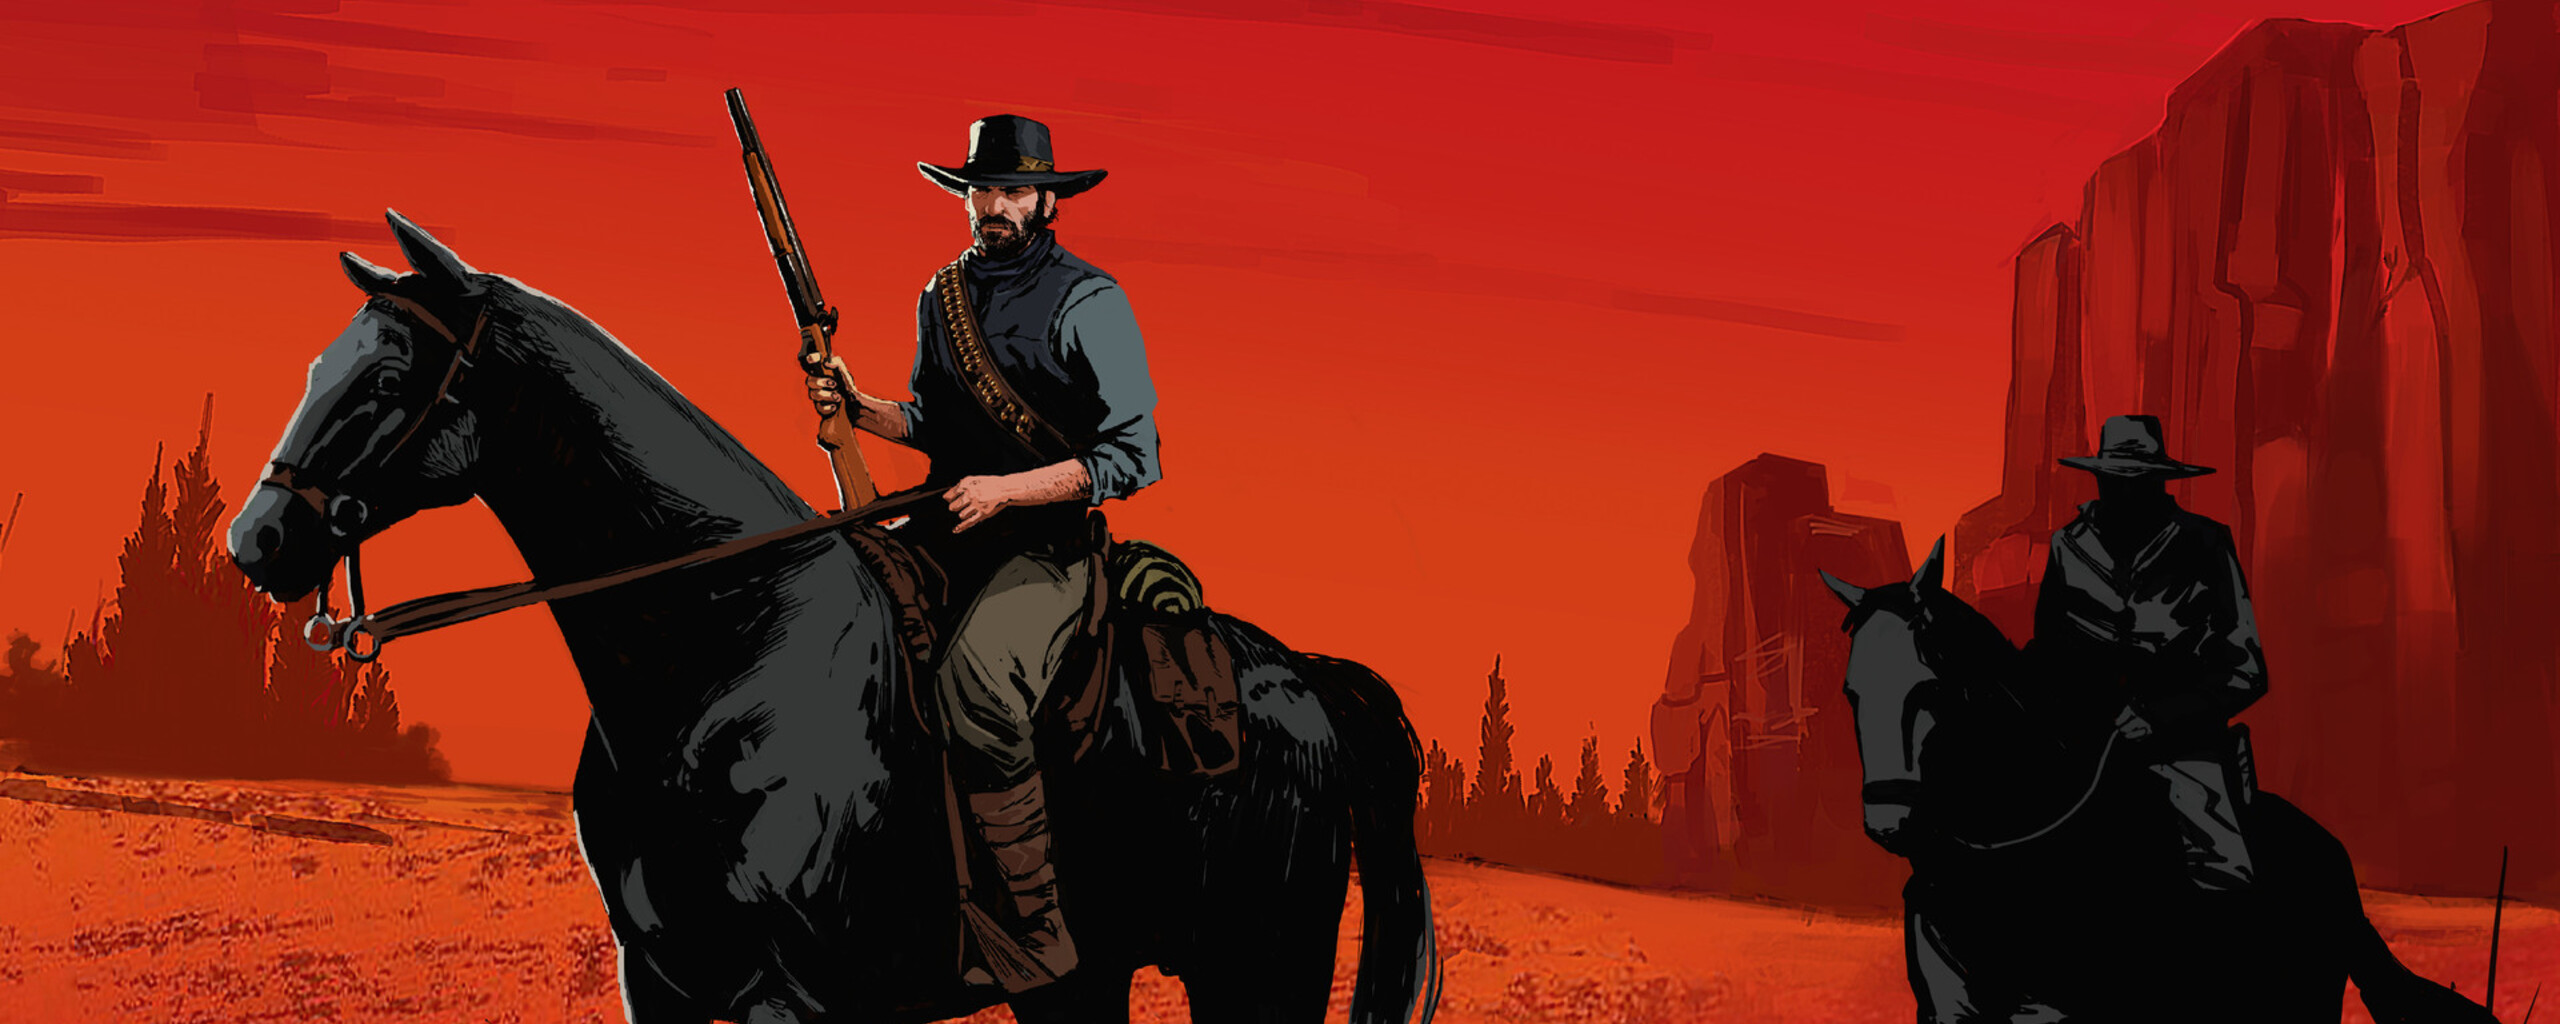 artwork-wallpapers. red-dead-redemption-2-wallpapers. games-wallpapers. hd-wall...